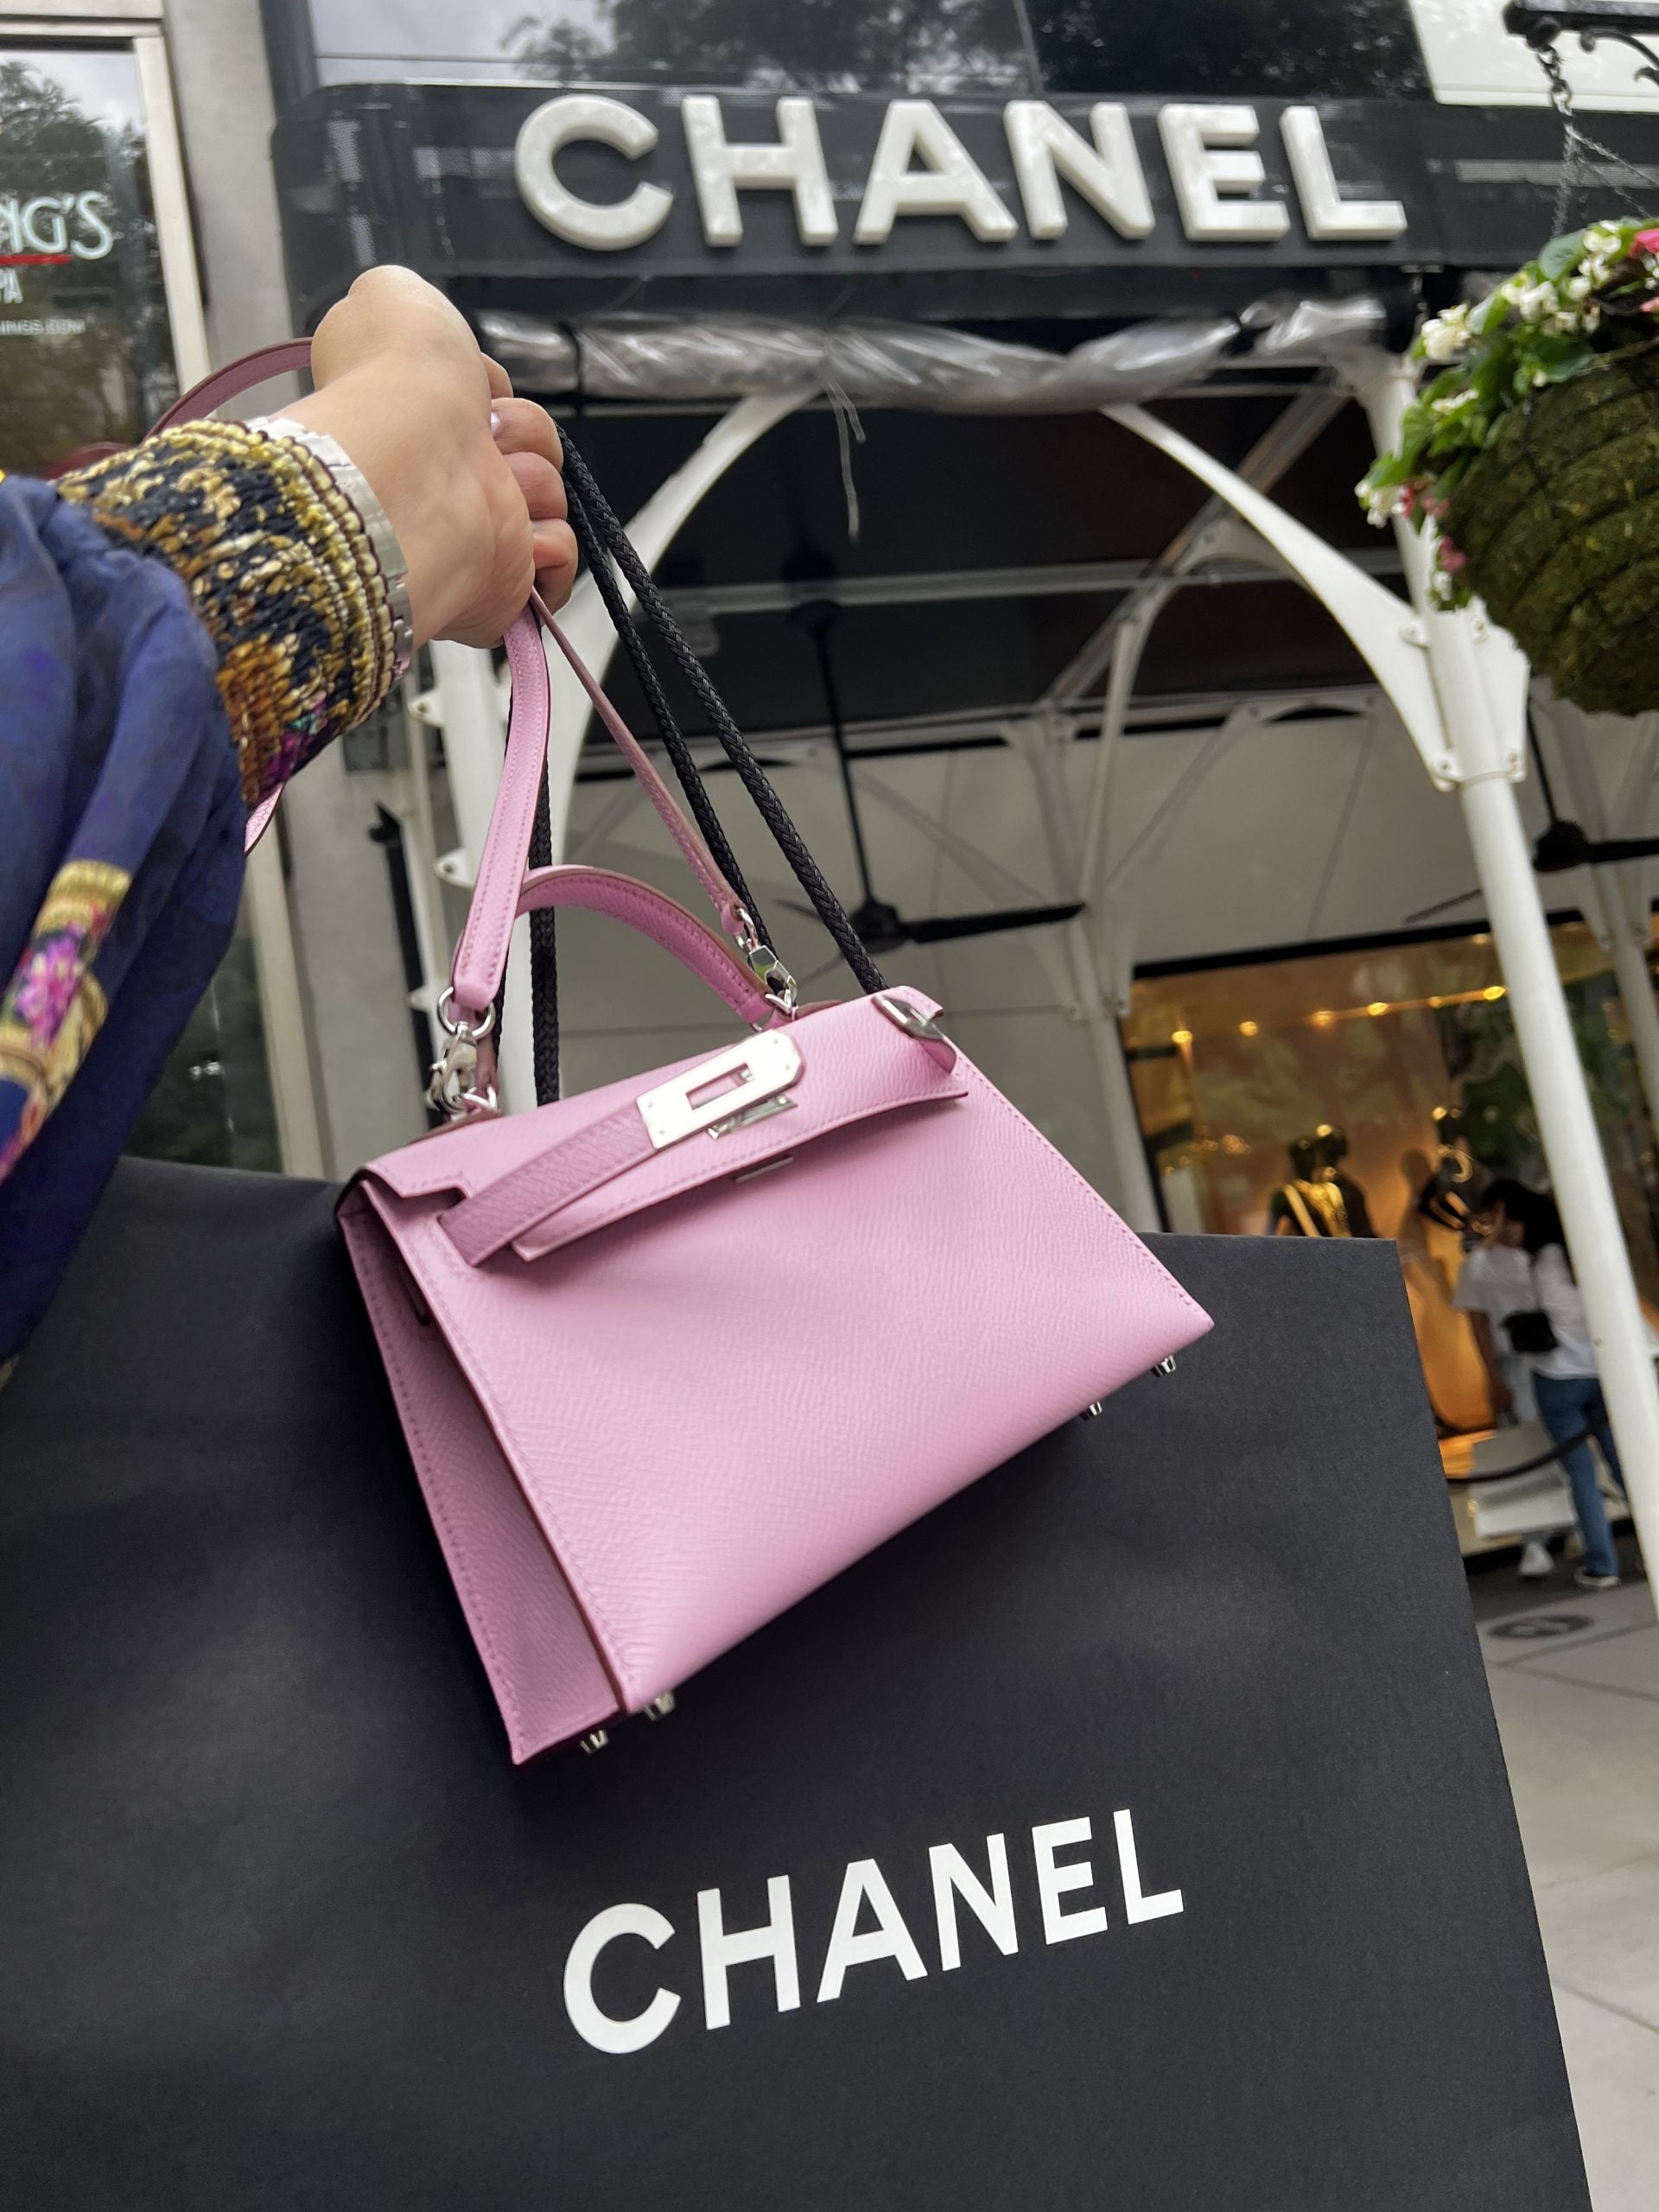 Chanel's $10,000 Handbags May Become Even Pricier in September - Bloomberg